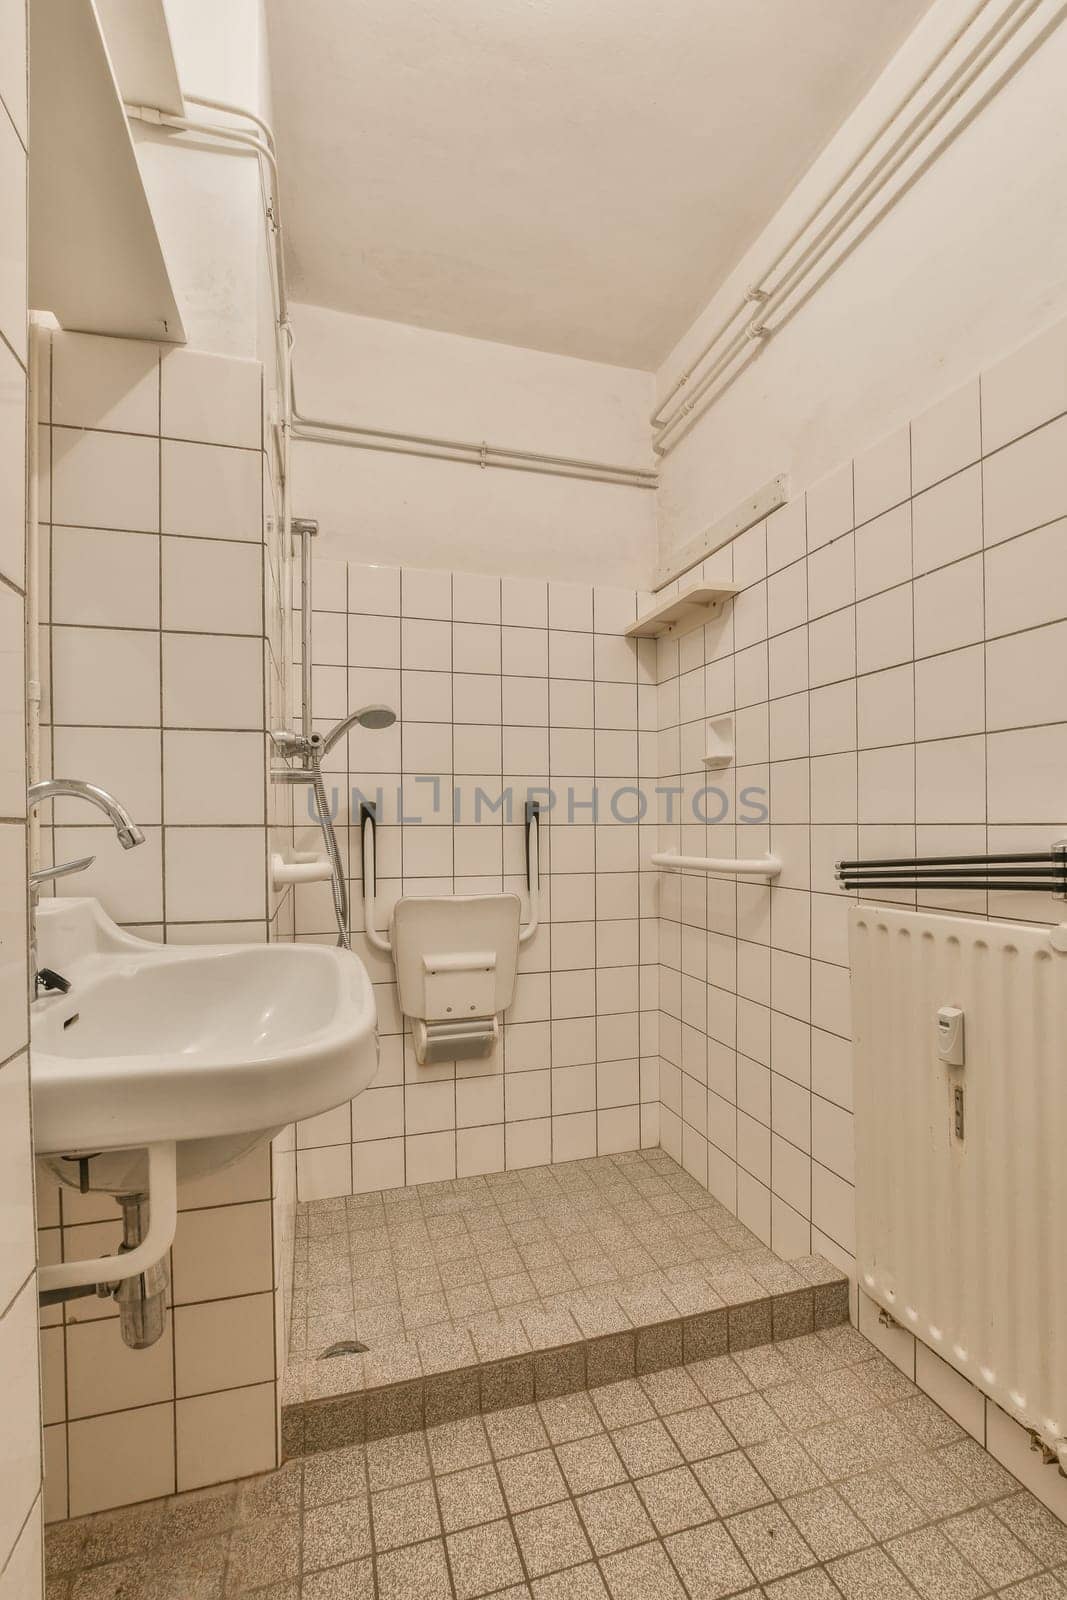 a bathroom with white tiles on the walls and floor, there is a small sink in the corner next to the toilet